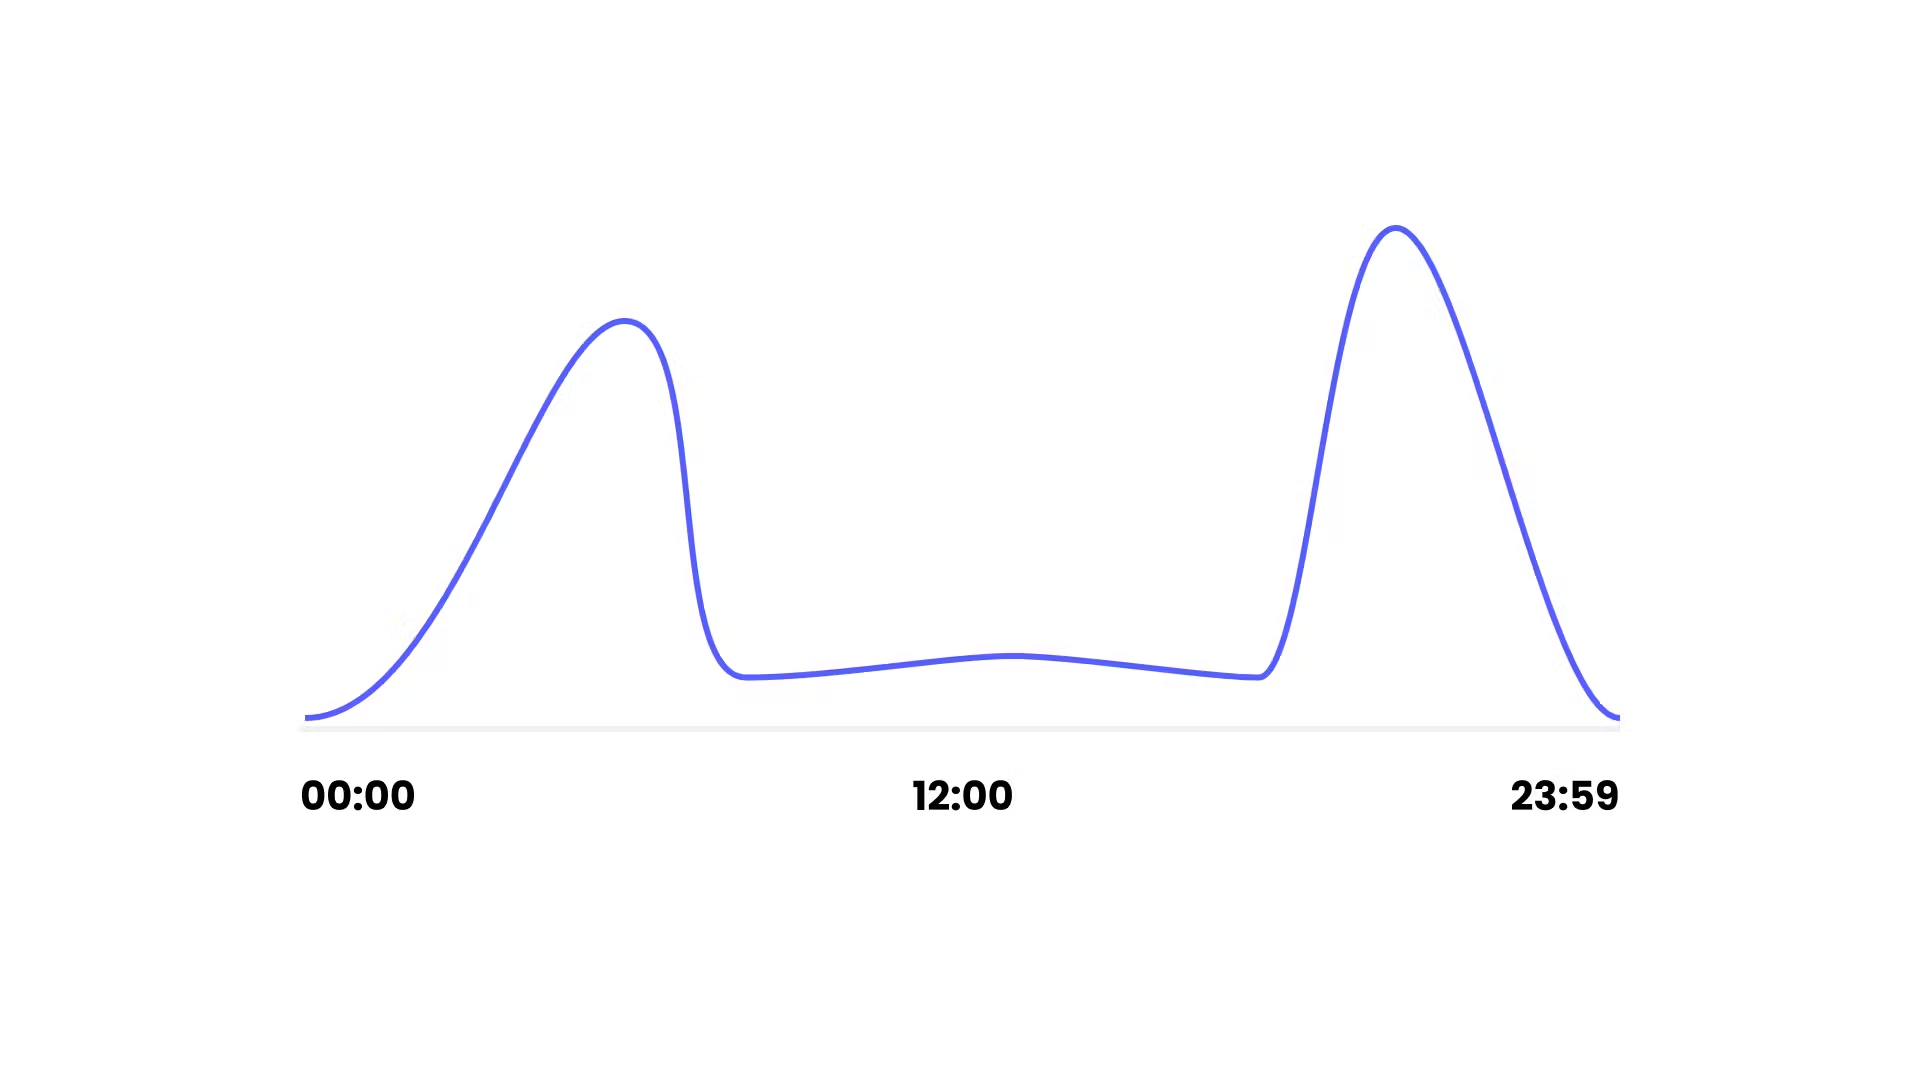 Candy crush usage spikes